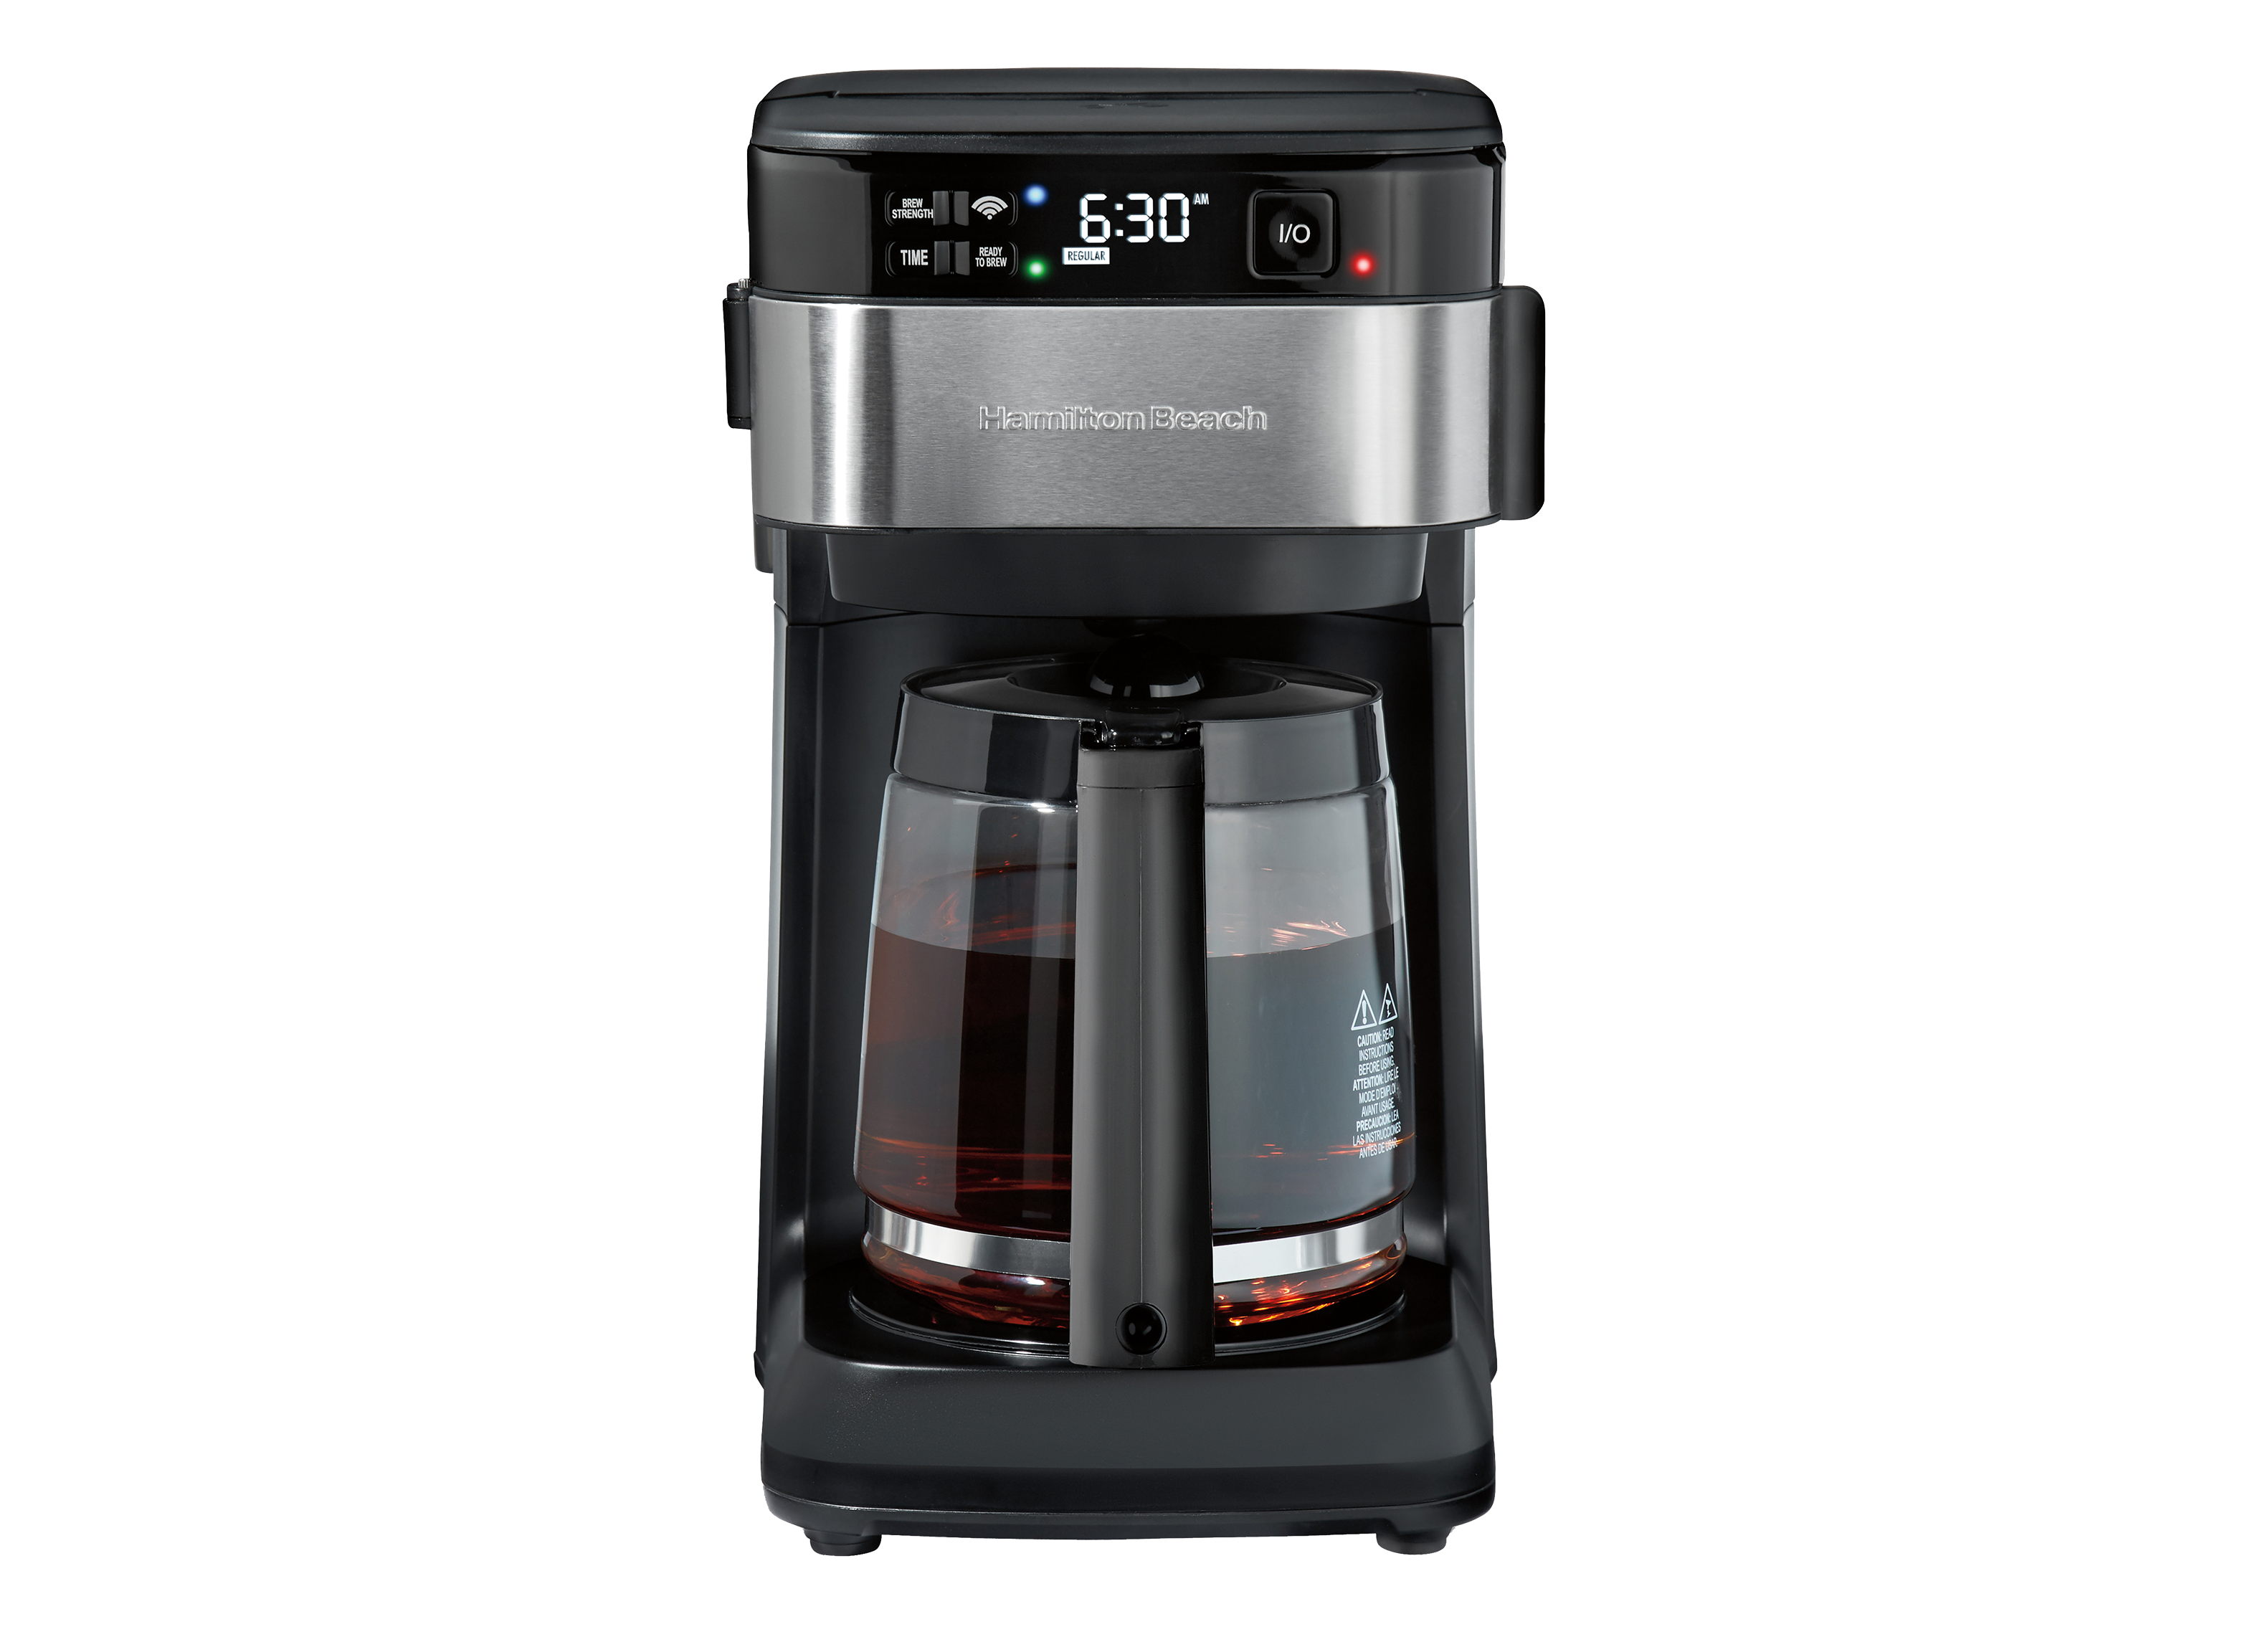 https://crdms.images.consumerreports.org/prod/products/cr/models/400768-drip-coffee-makers-with-carafe-hamilton-beach-programmable-alexa-smart-49350-10011102.png